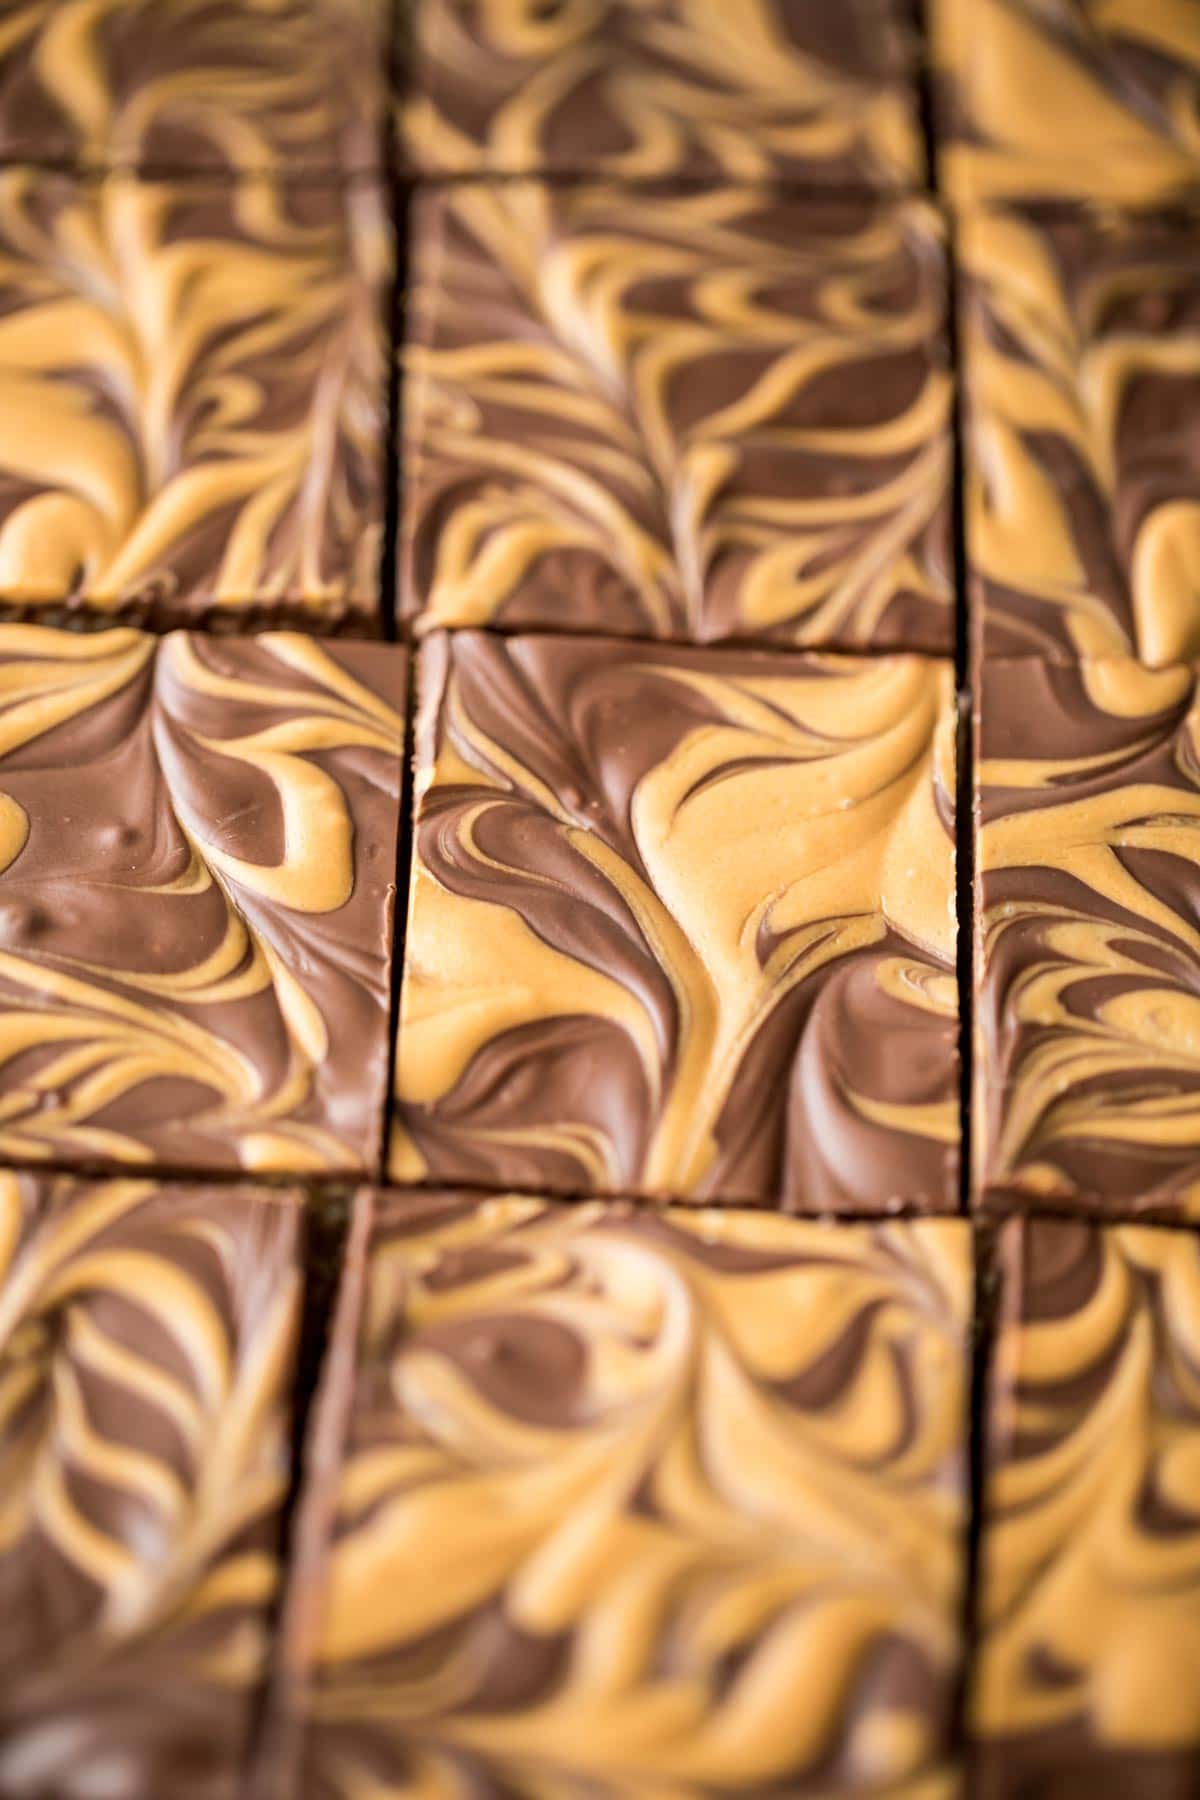 swirly butterscotch and chocolate topped cereal bars just after cutting